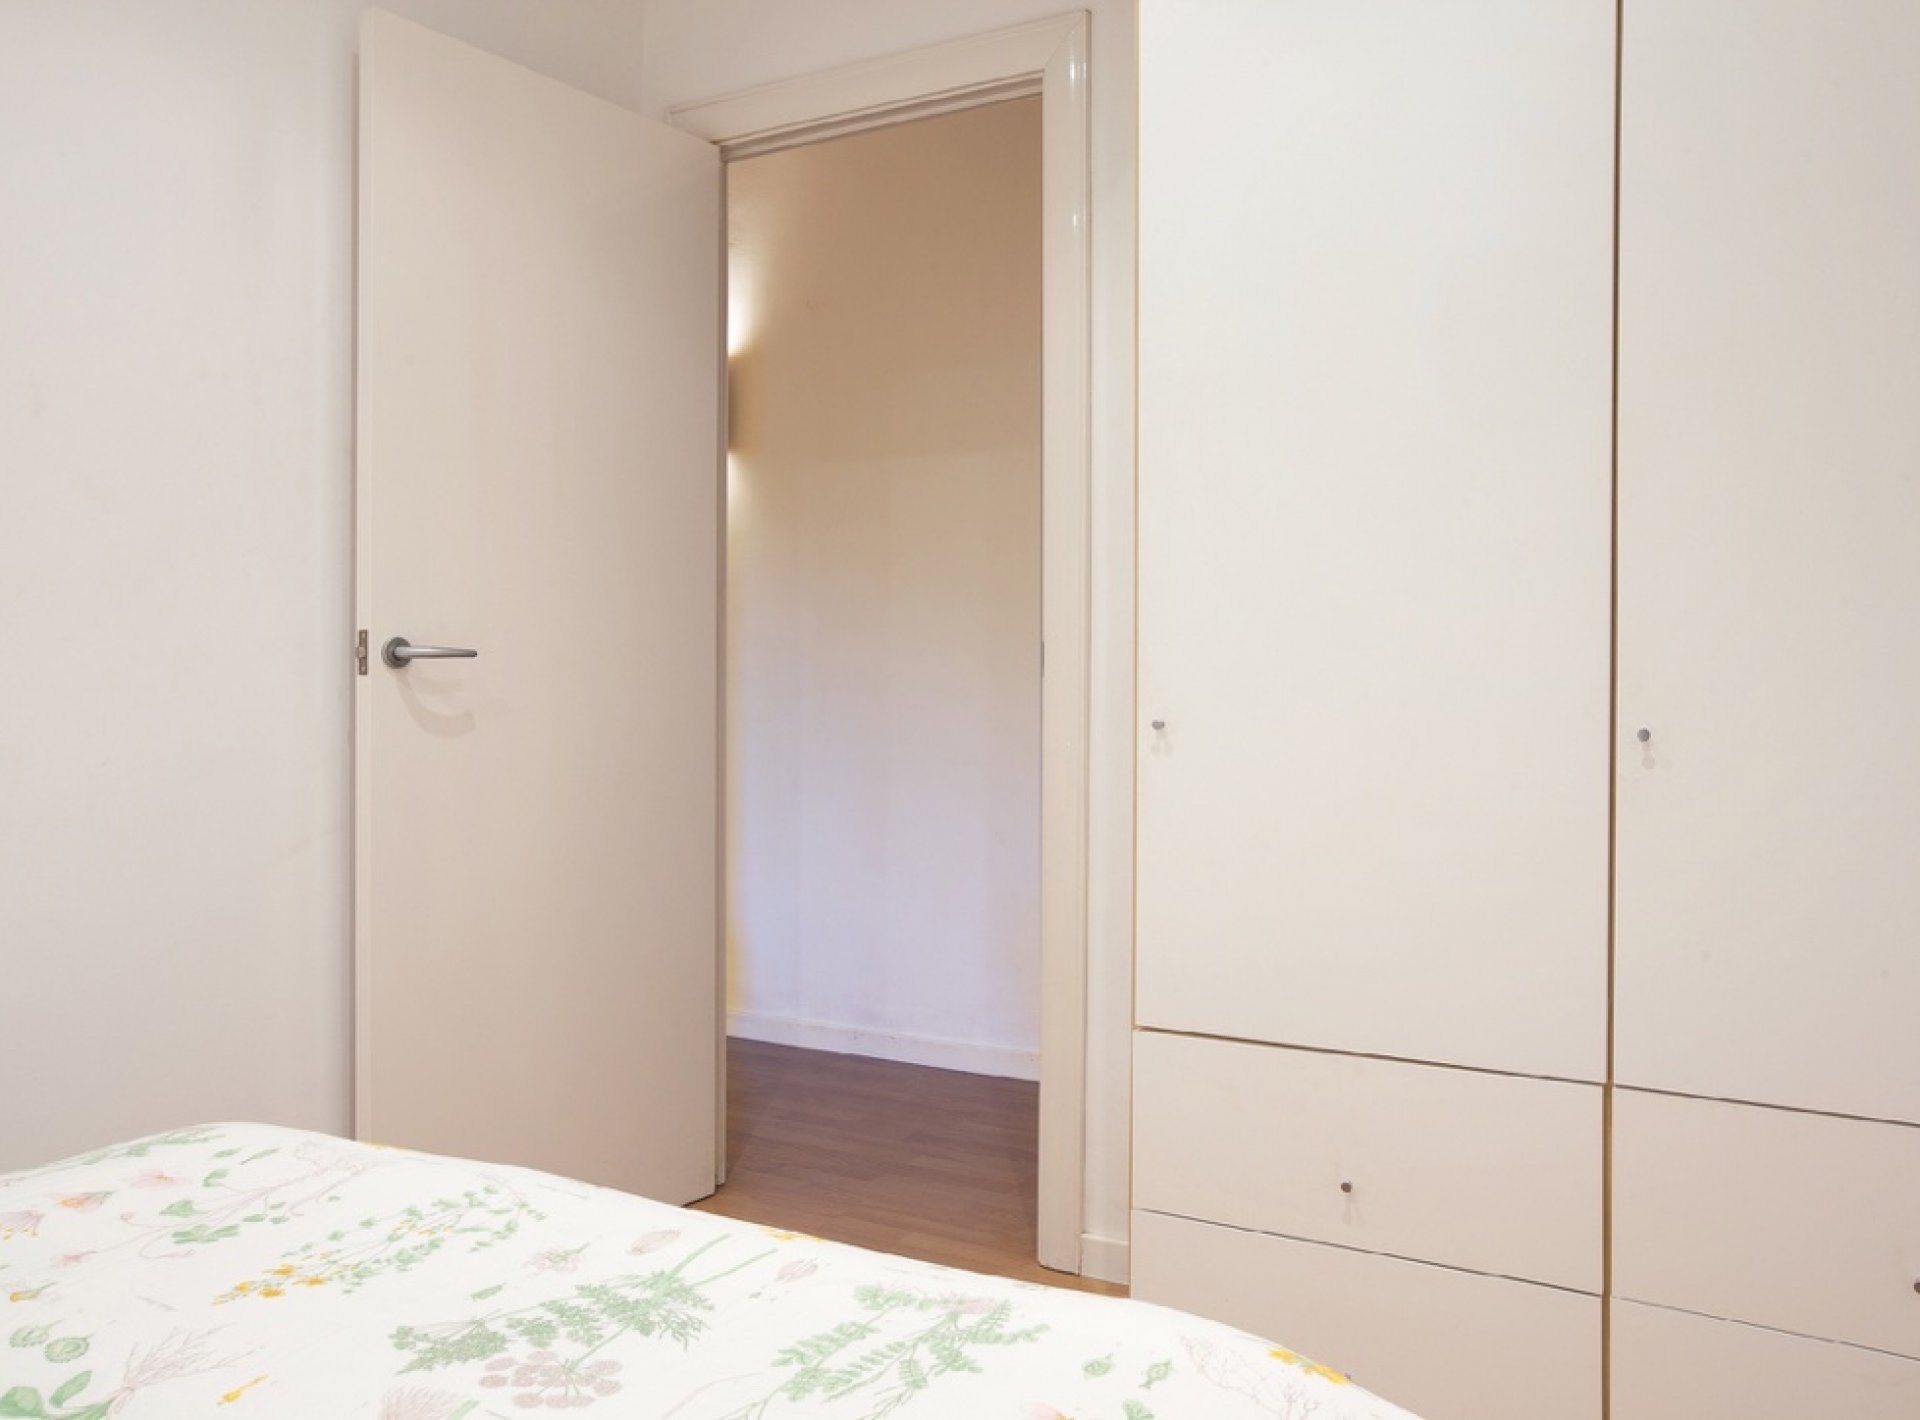 Authentic flat 2BR in Poble Sec